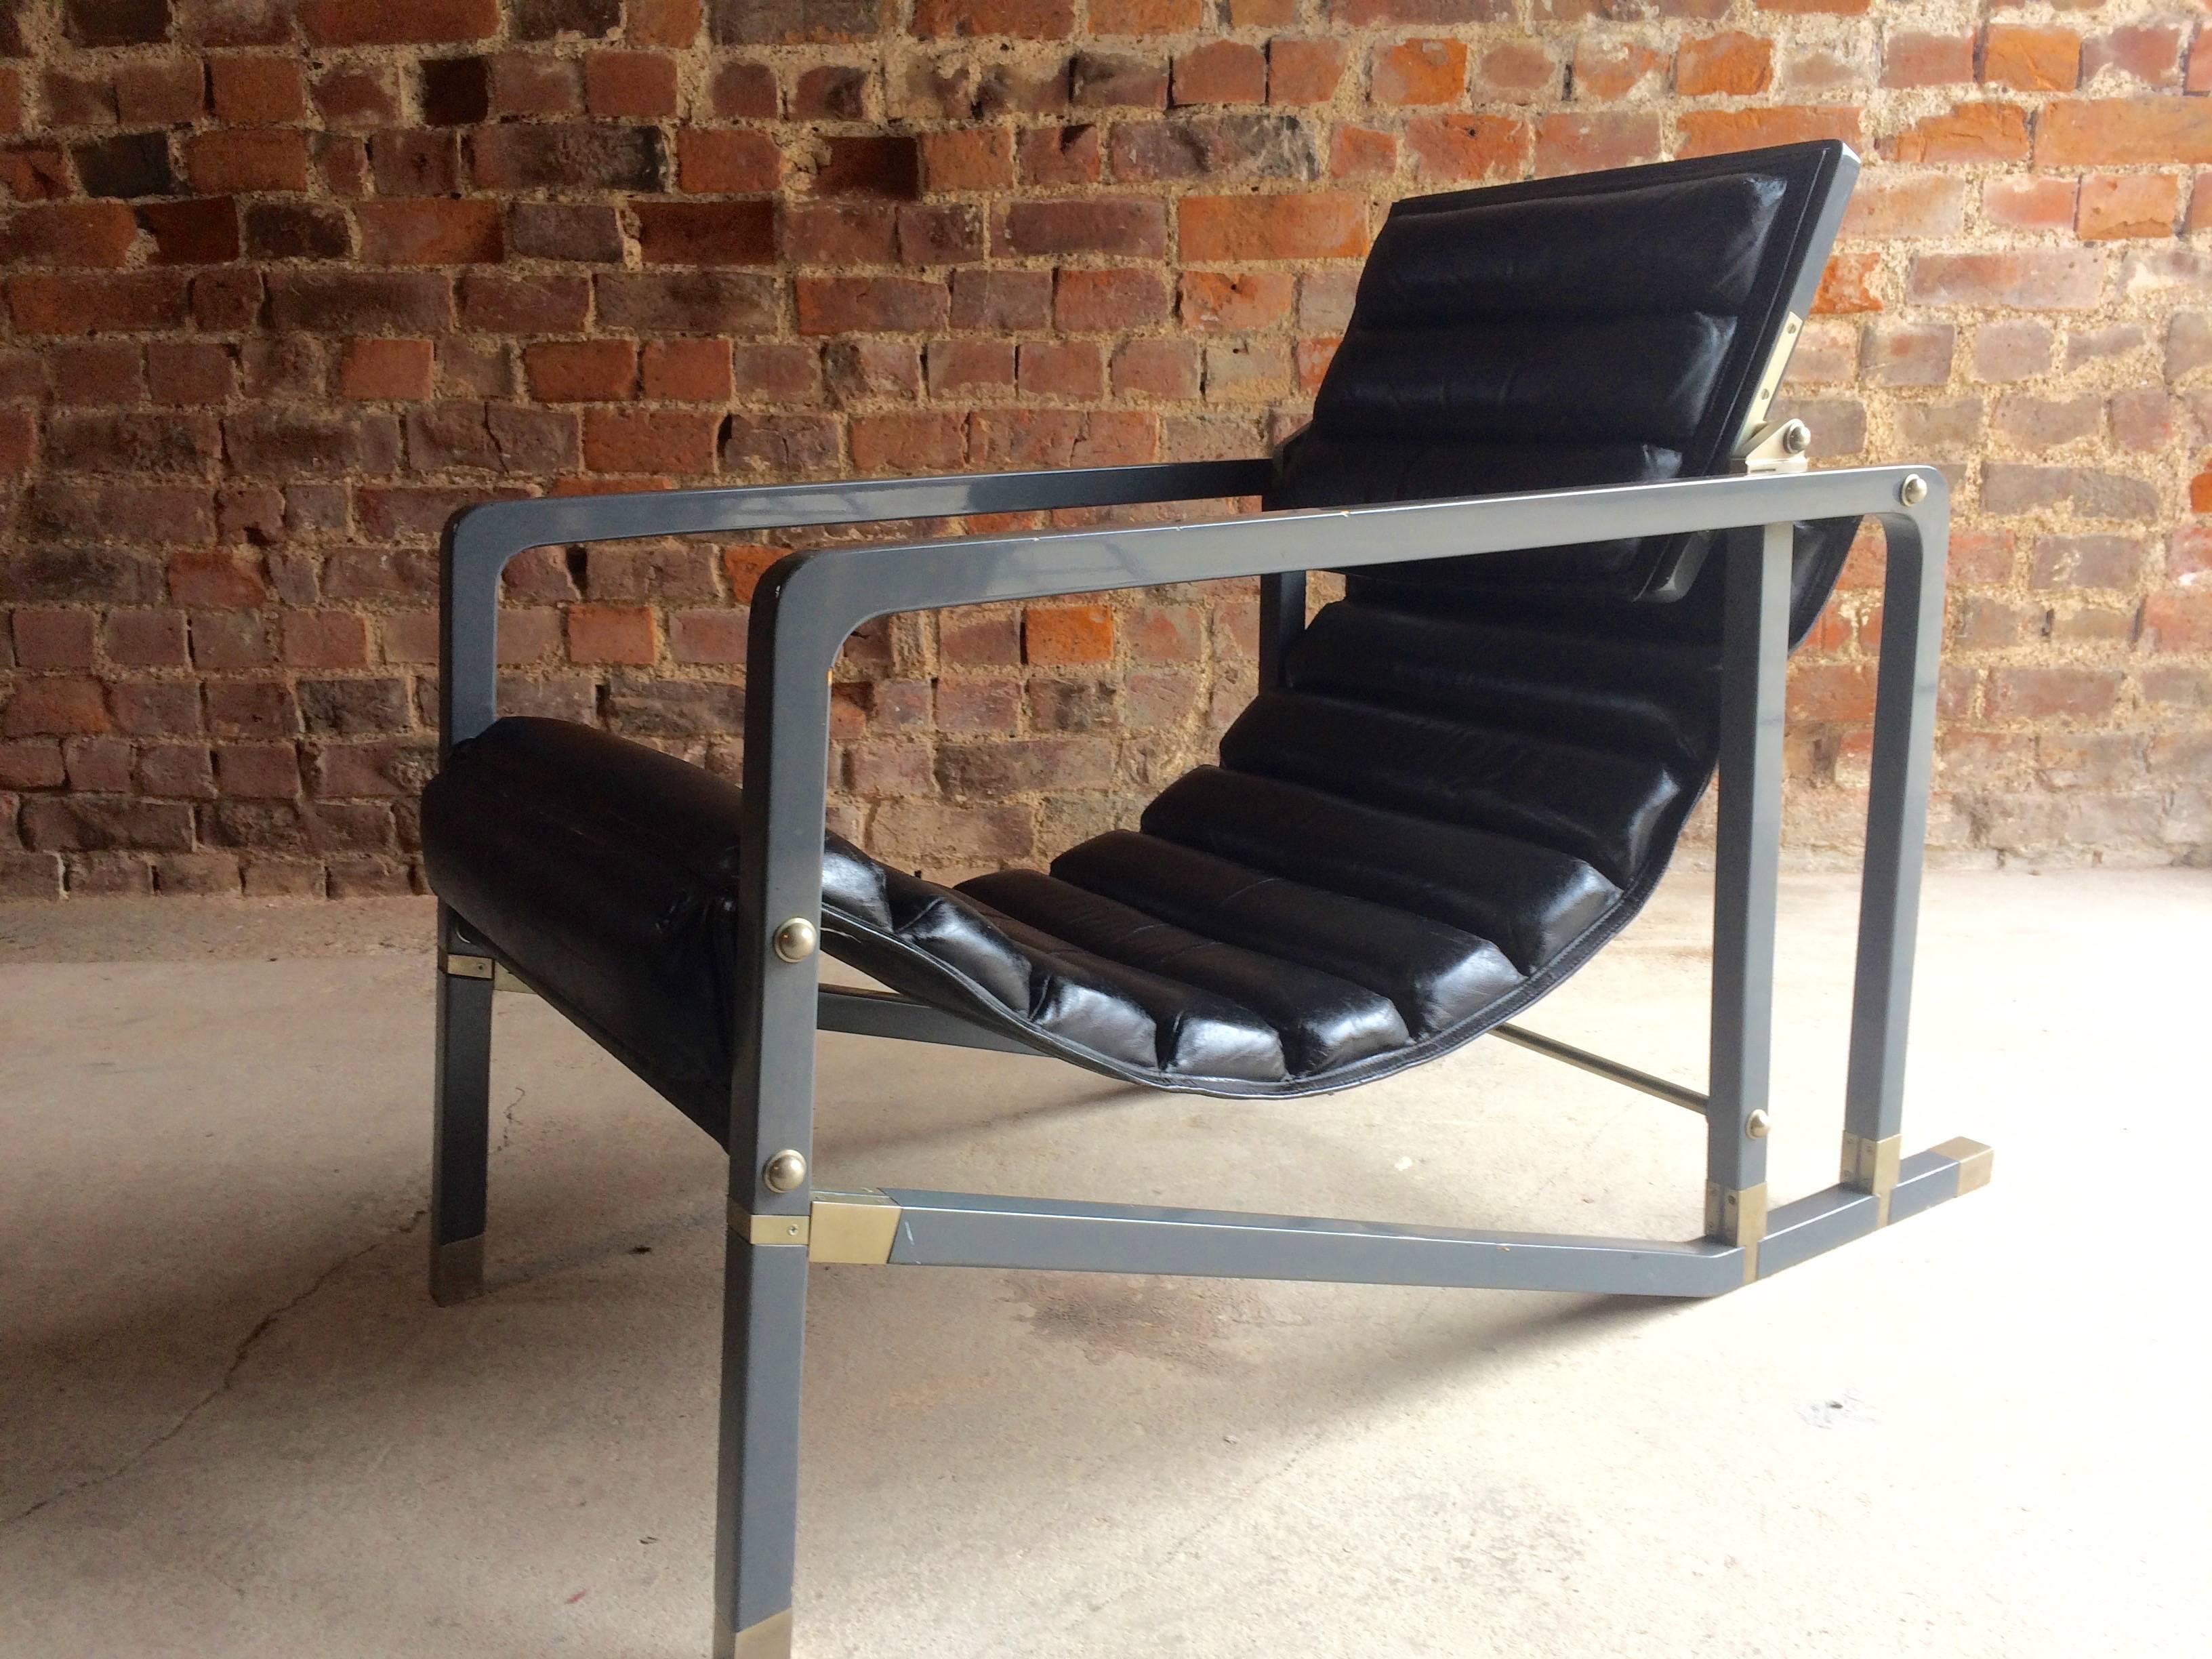 American Classical Iconic Transat Chair by Eileen Gray, Manufactured by Aram, Late 20th Century